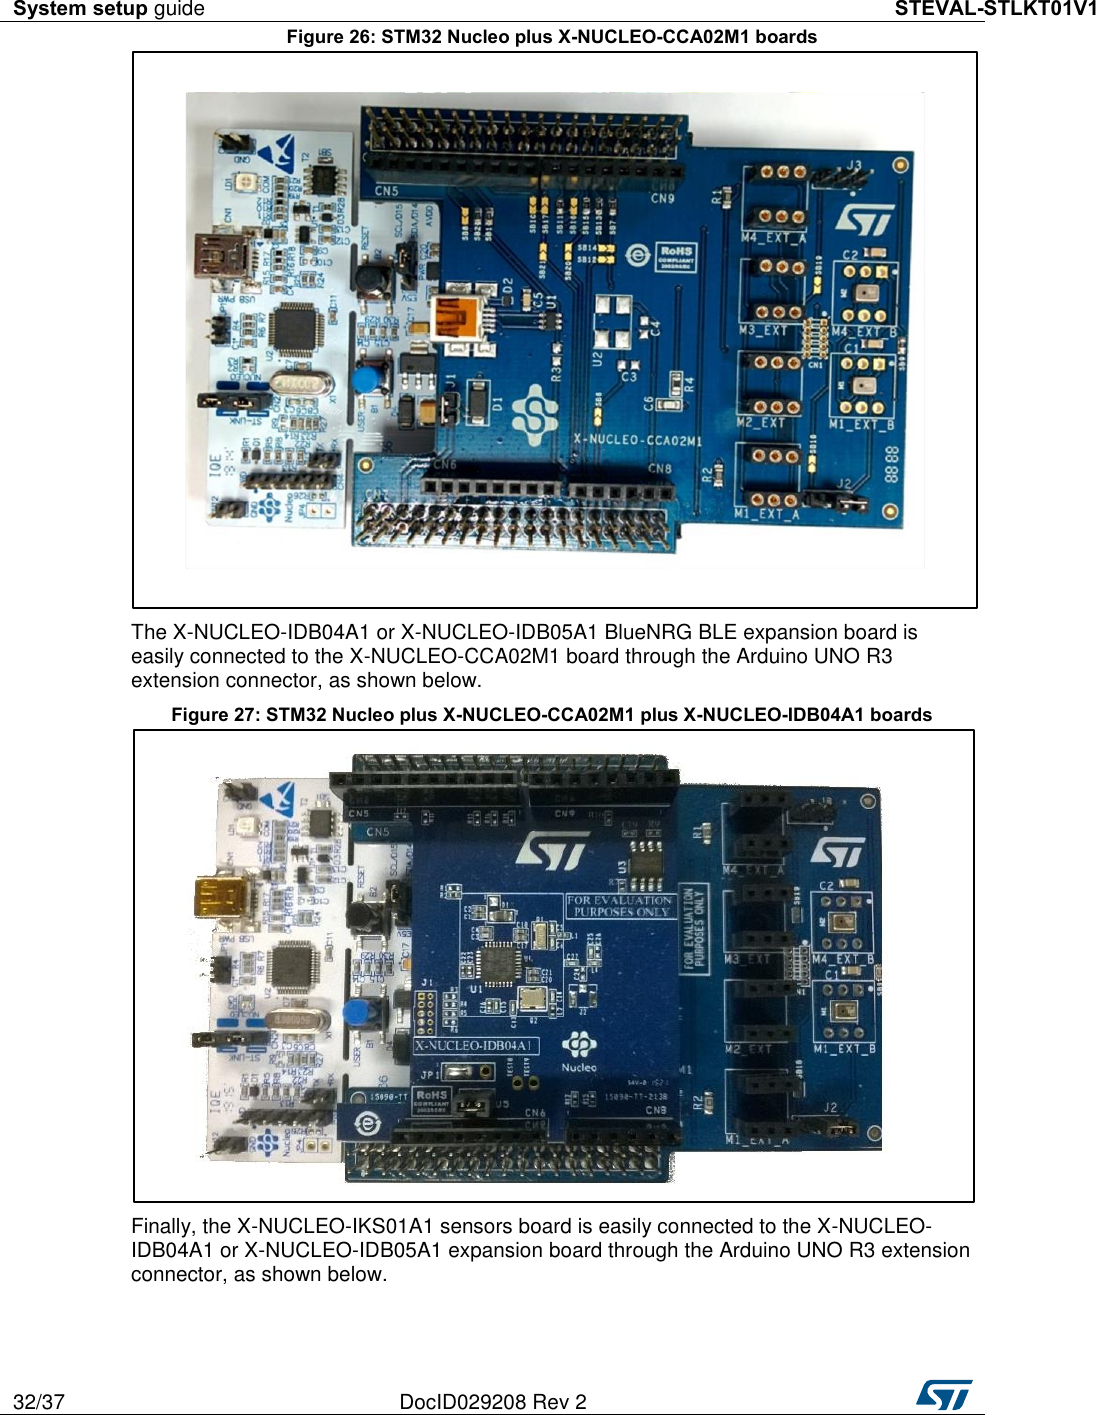 System setup guide STEVAL-STLKT01V1 32/37 DocID029208 Rev 2   Figure 26: STM32 Nucleo plus X-NUCLEO-CCA02M1 boards  The X-NUCLEO-IDB04A1 or X-NUCLEO-IDB05A1 BlueNRG BLE expansion board is easily connected to the X-NUCLEO-CCA02M1 board through the Arduino UNO R3 extension connector, as shown below. Figure 27: STM32 Nucleo plus X-NUCLEO-CCA02M1 plus X-NUCLEO-IDB04A1 boards  Finally, the X-NUCLEO-IKS01A1 sensors board is easily connected to the X-NUCLEO-IDB04A1 or X-NUCLEO-IDB05A1 expansion board through the Arduino UNO R3 extension connector, as shown below. 